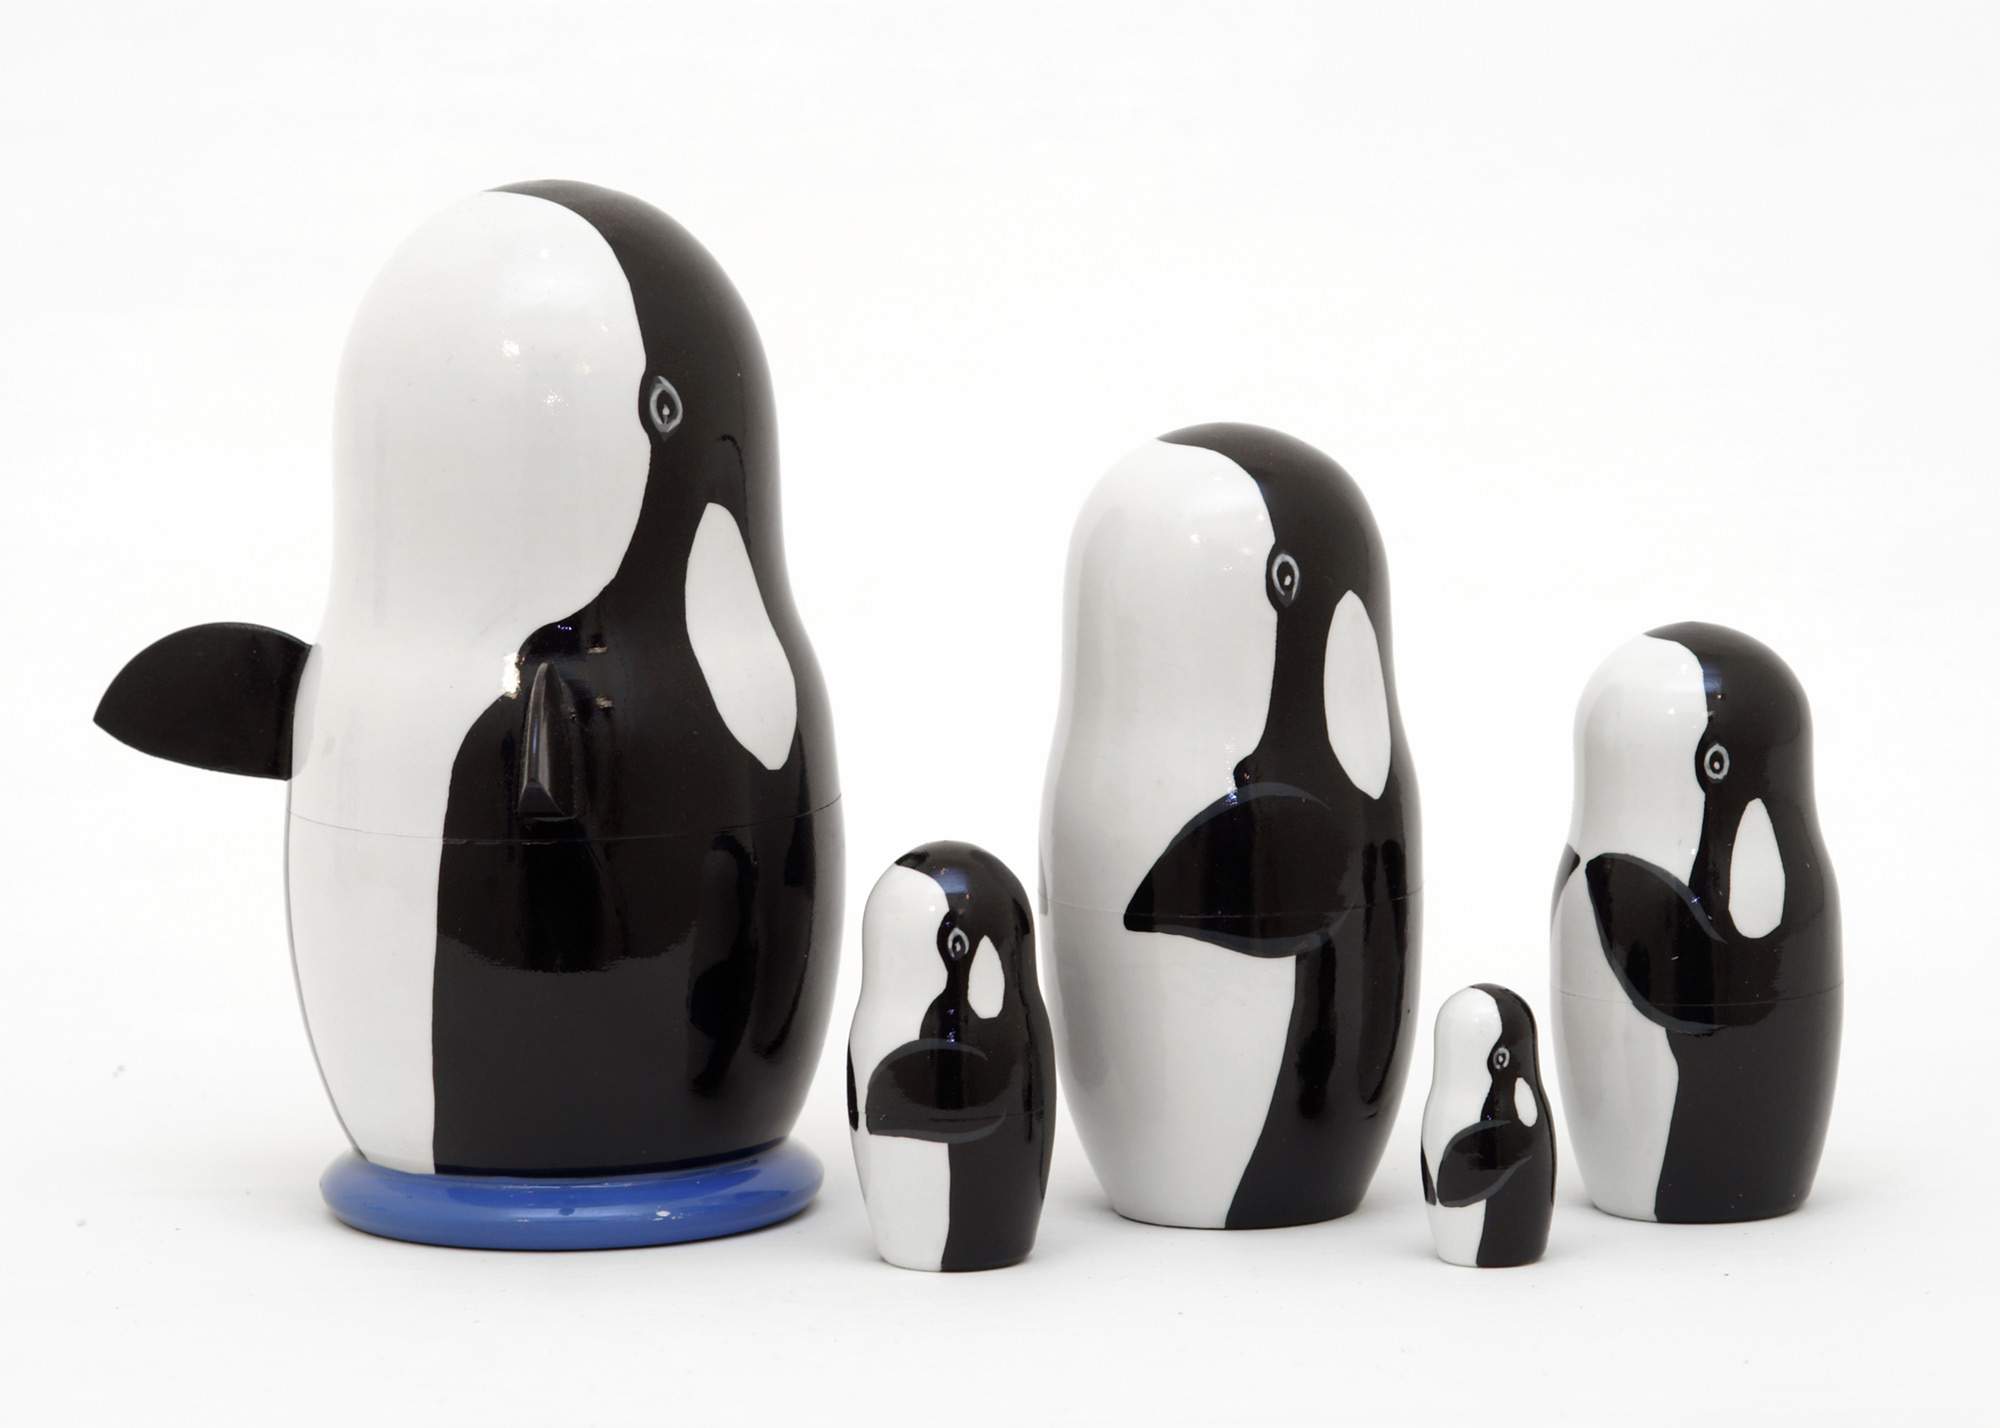 Buy Orca Whale Nesting Doll w/ Fins 5pc./6" at GoldenCockerel.com